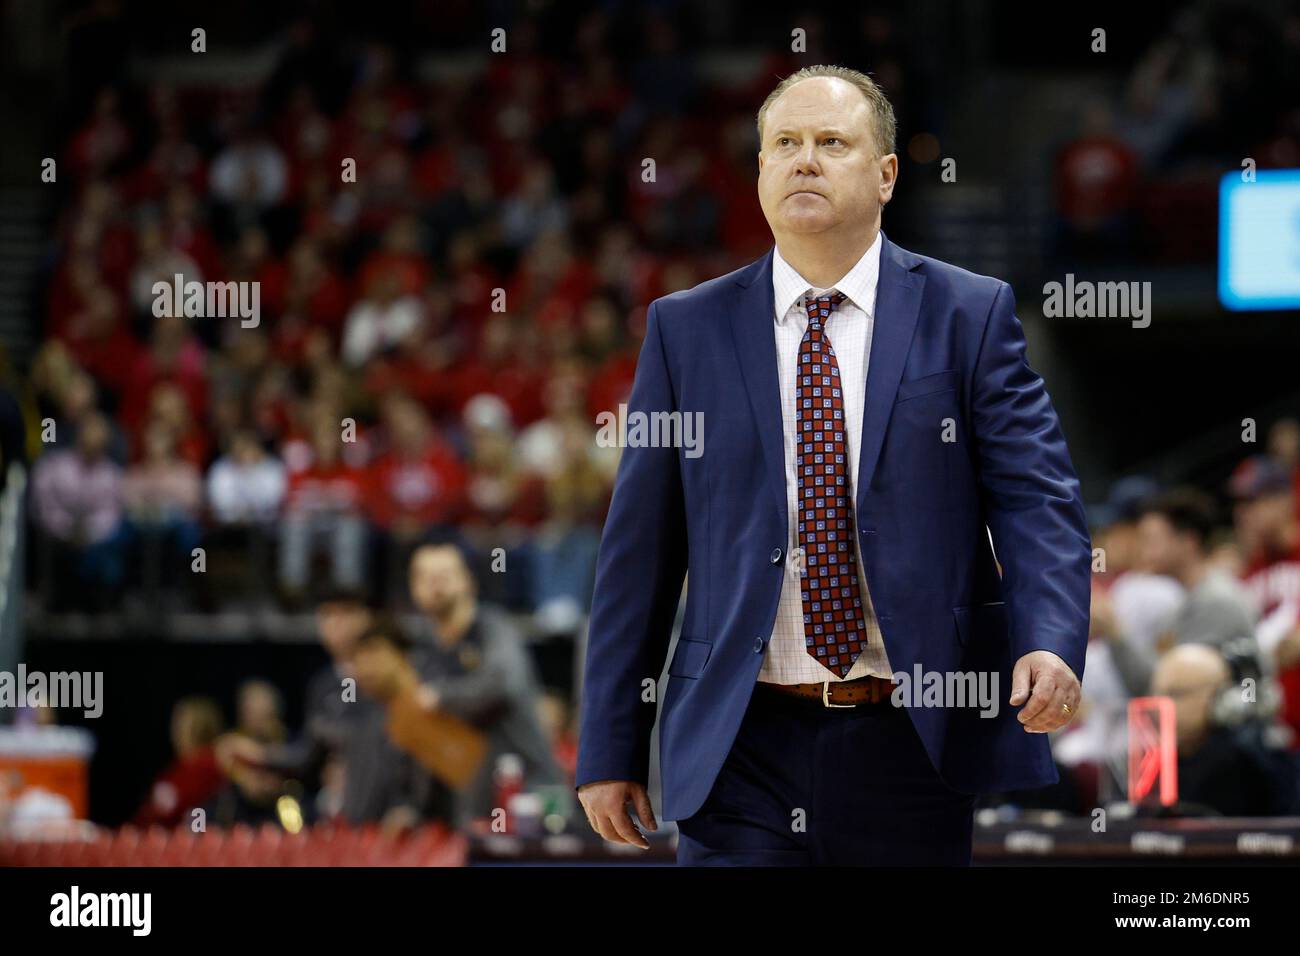 Madison, WI, USA. 3rd Jan, 2023. Wisconsin Badgers head coach Greg Gard during the NCAA basketball game between the Minnesota Golden Gophers and the Wisconsin Badgers at the Kohl Center in Madison, WI. Darren Lee/CSM/Alamy Live News Stock Photo